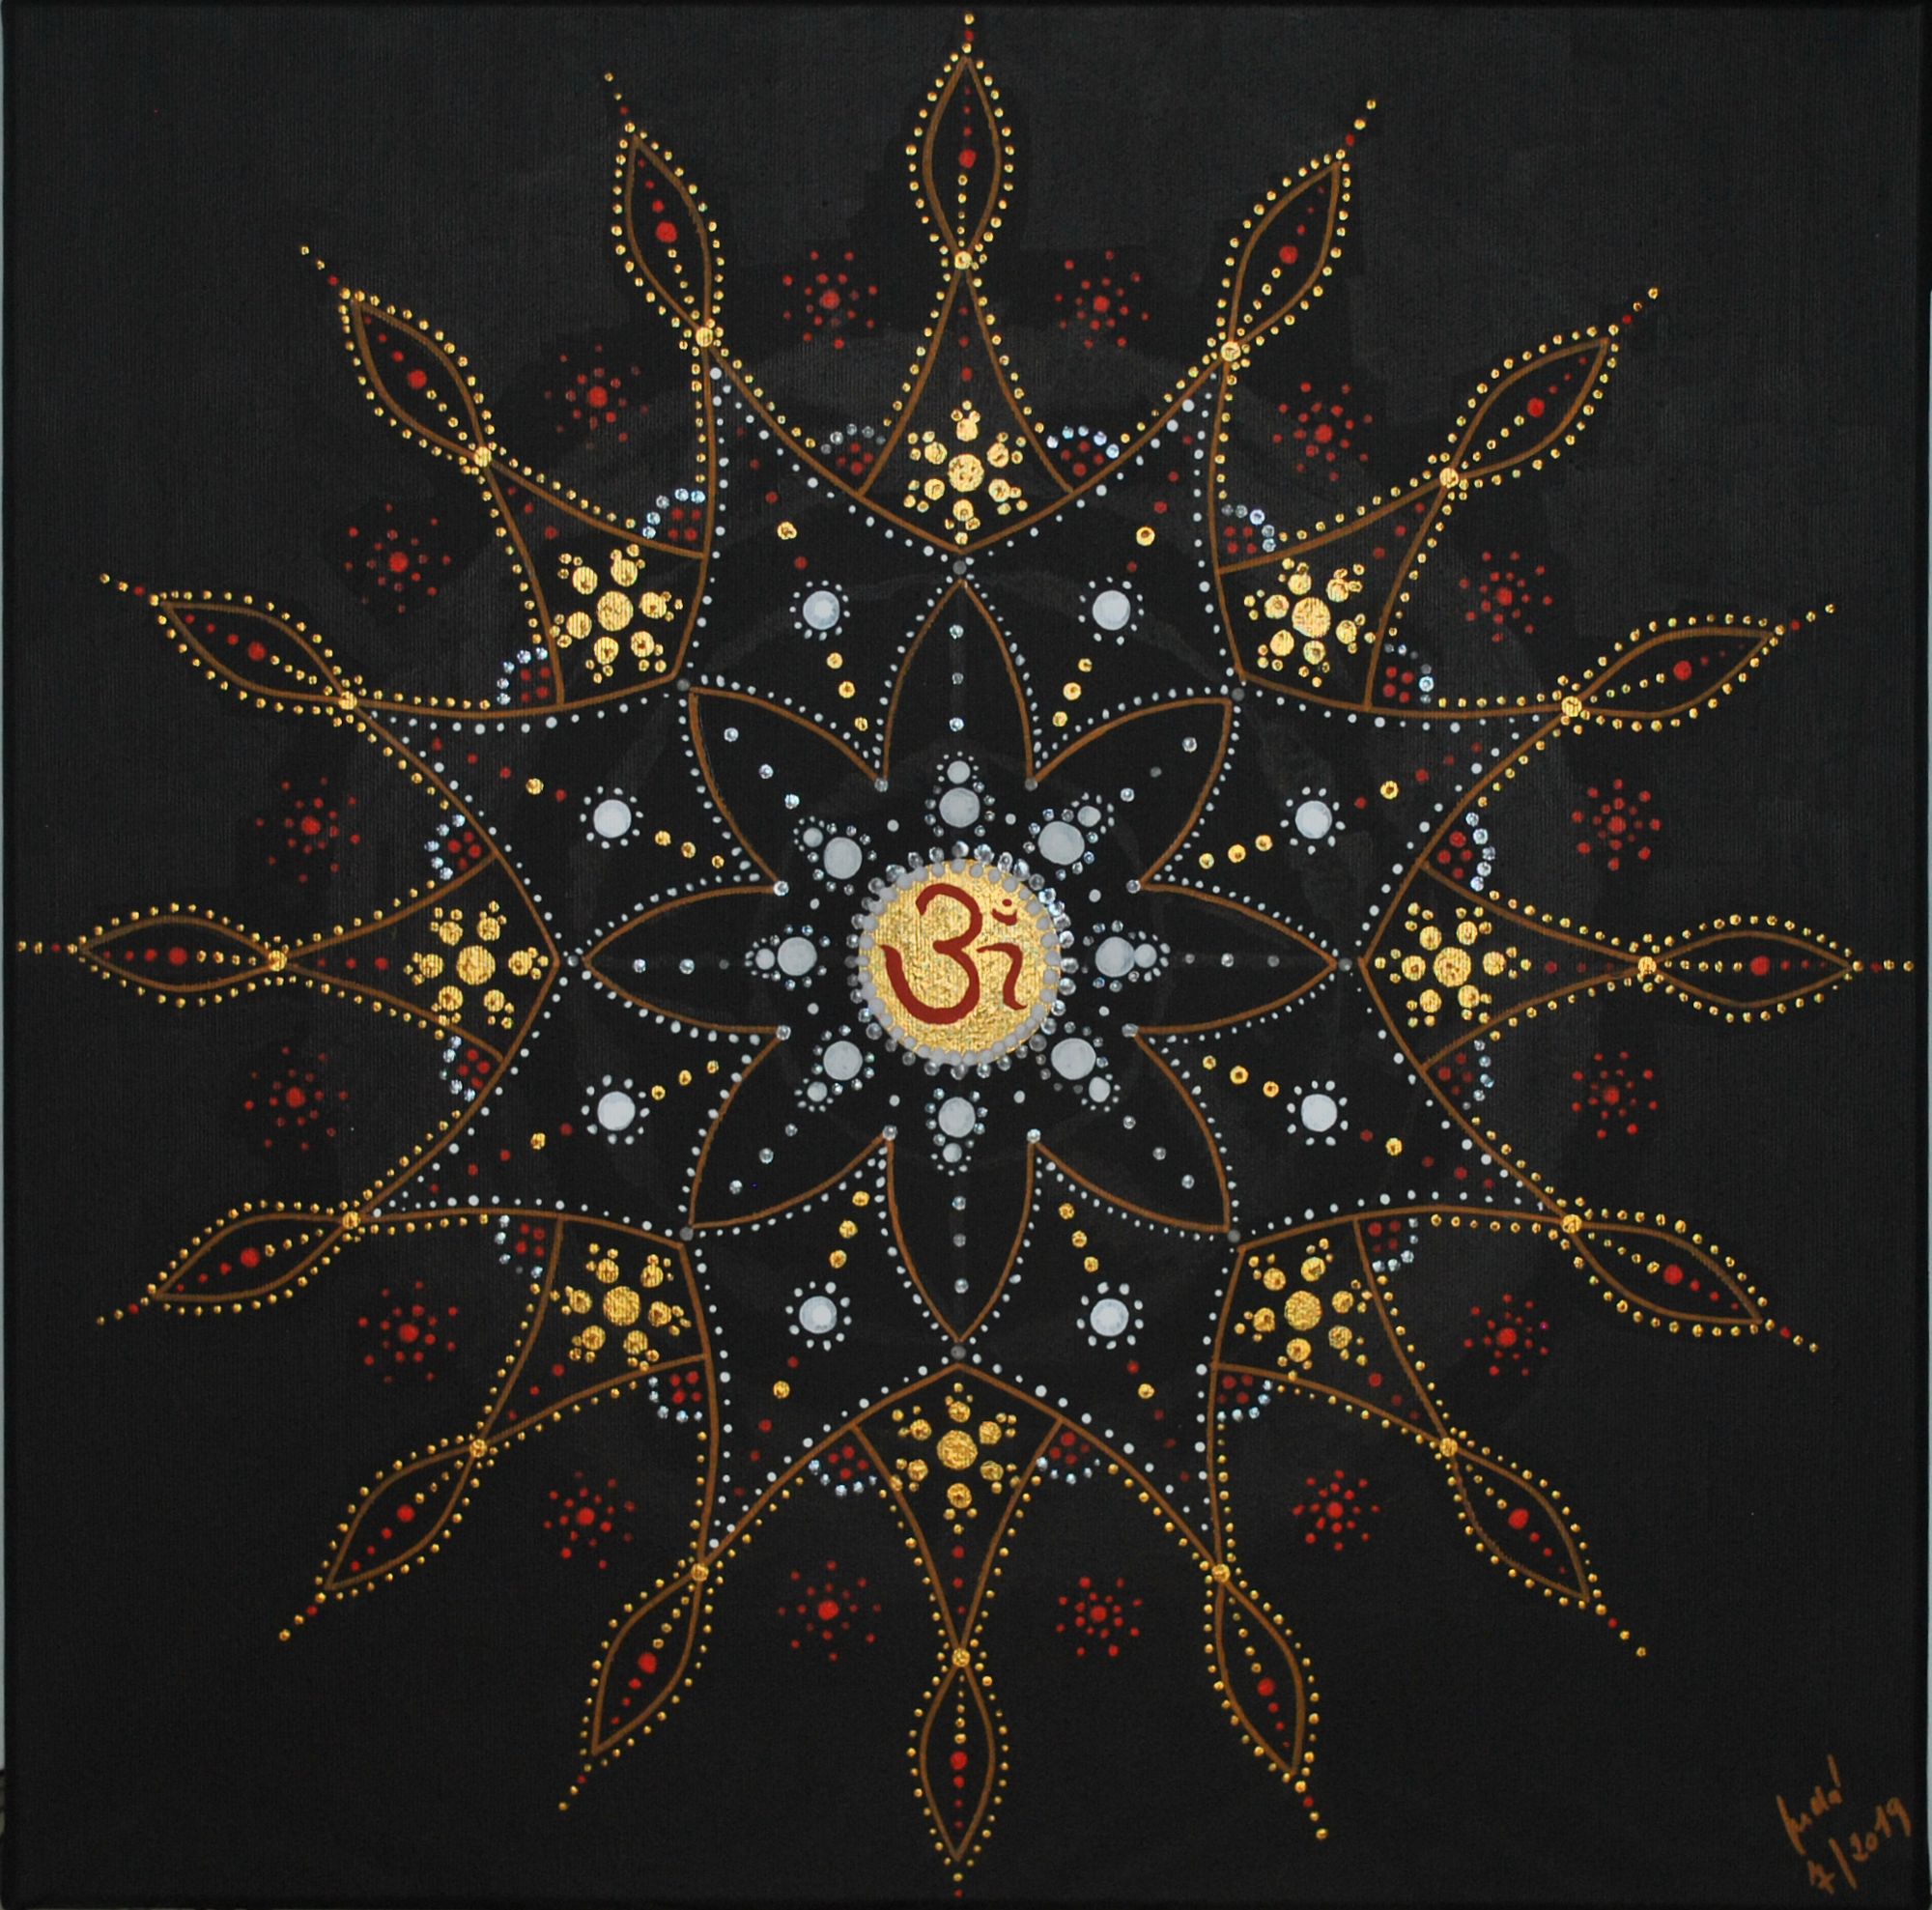 Golden mandala on a black background, in the middle of the Namaste sign.
Technique: acrylic on canvas.
Signed
